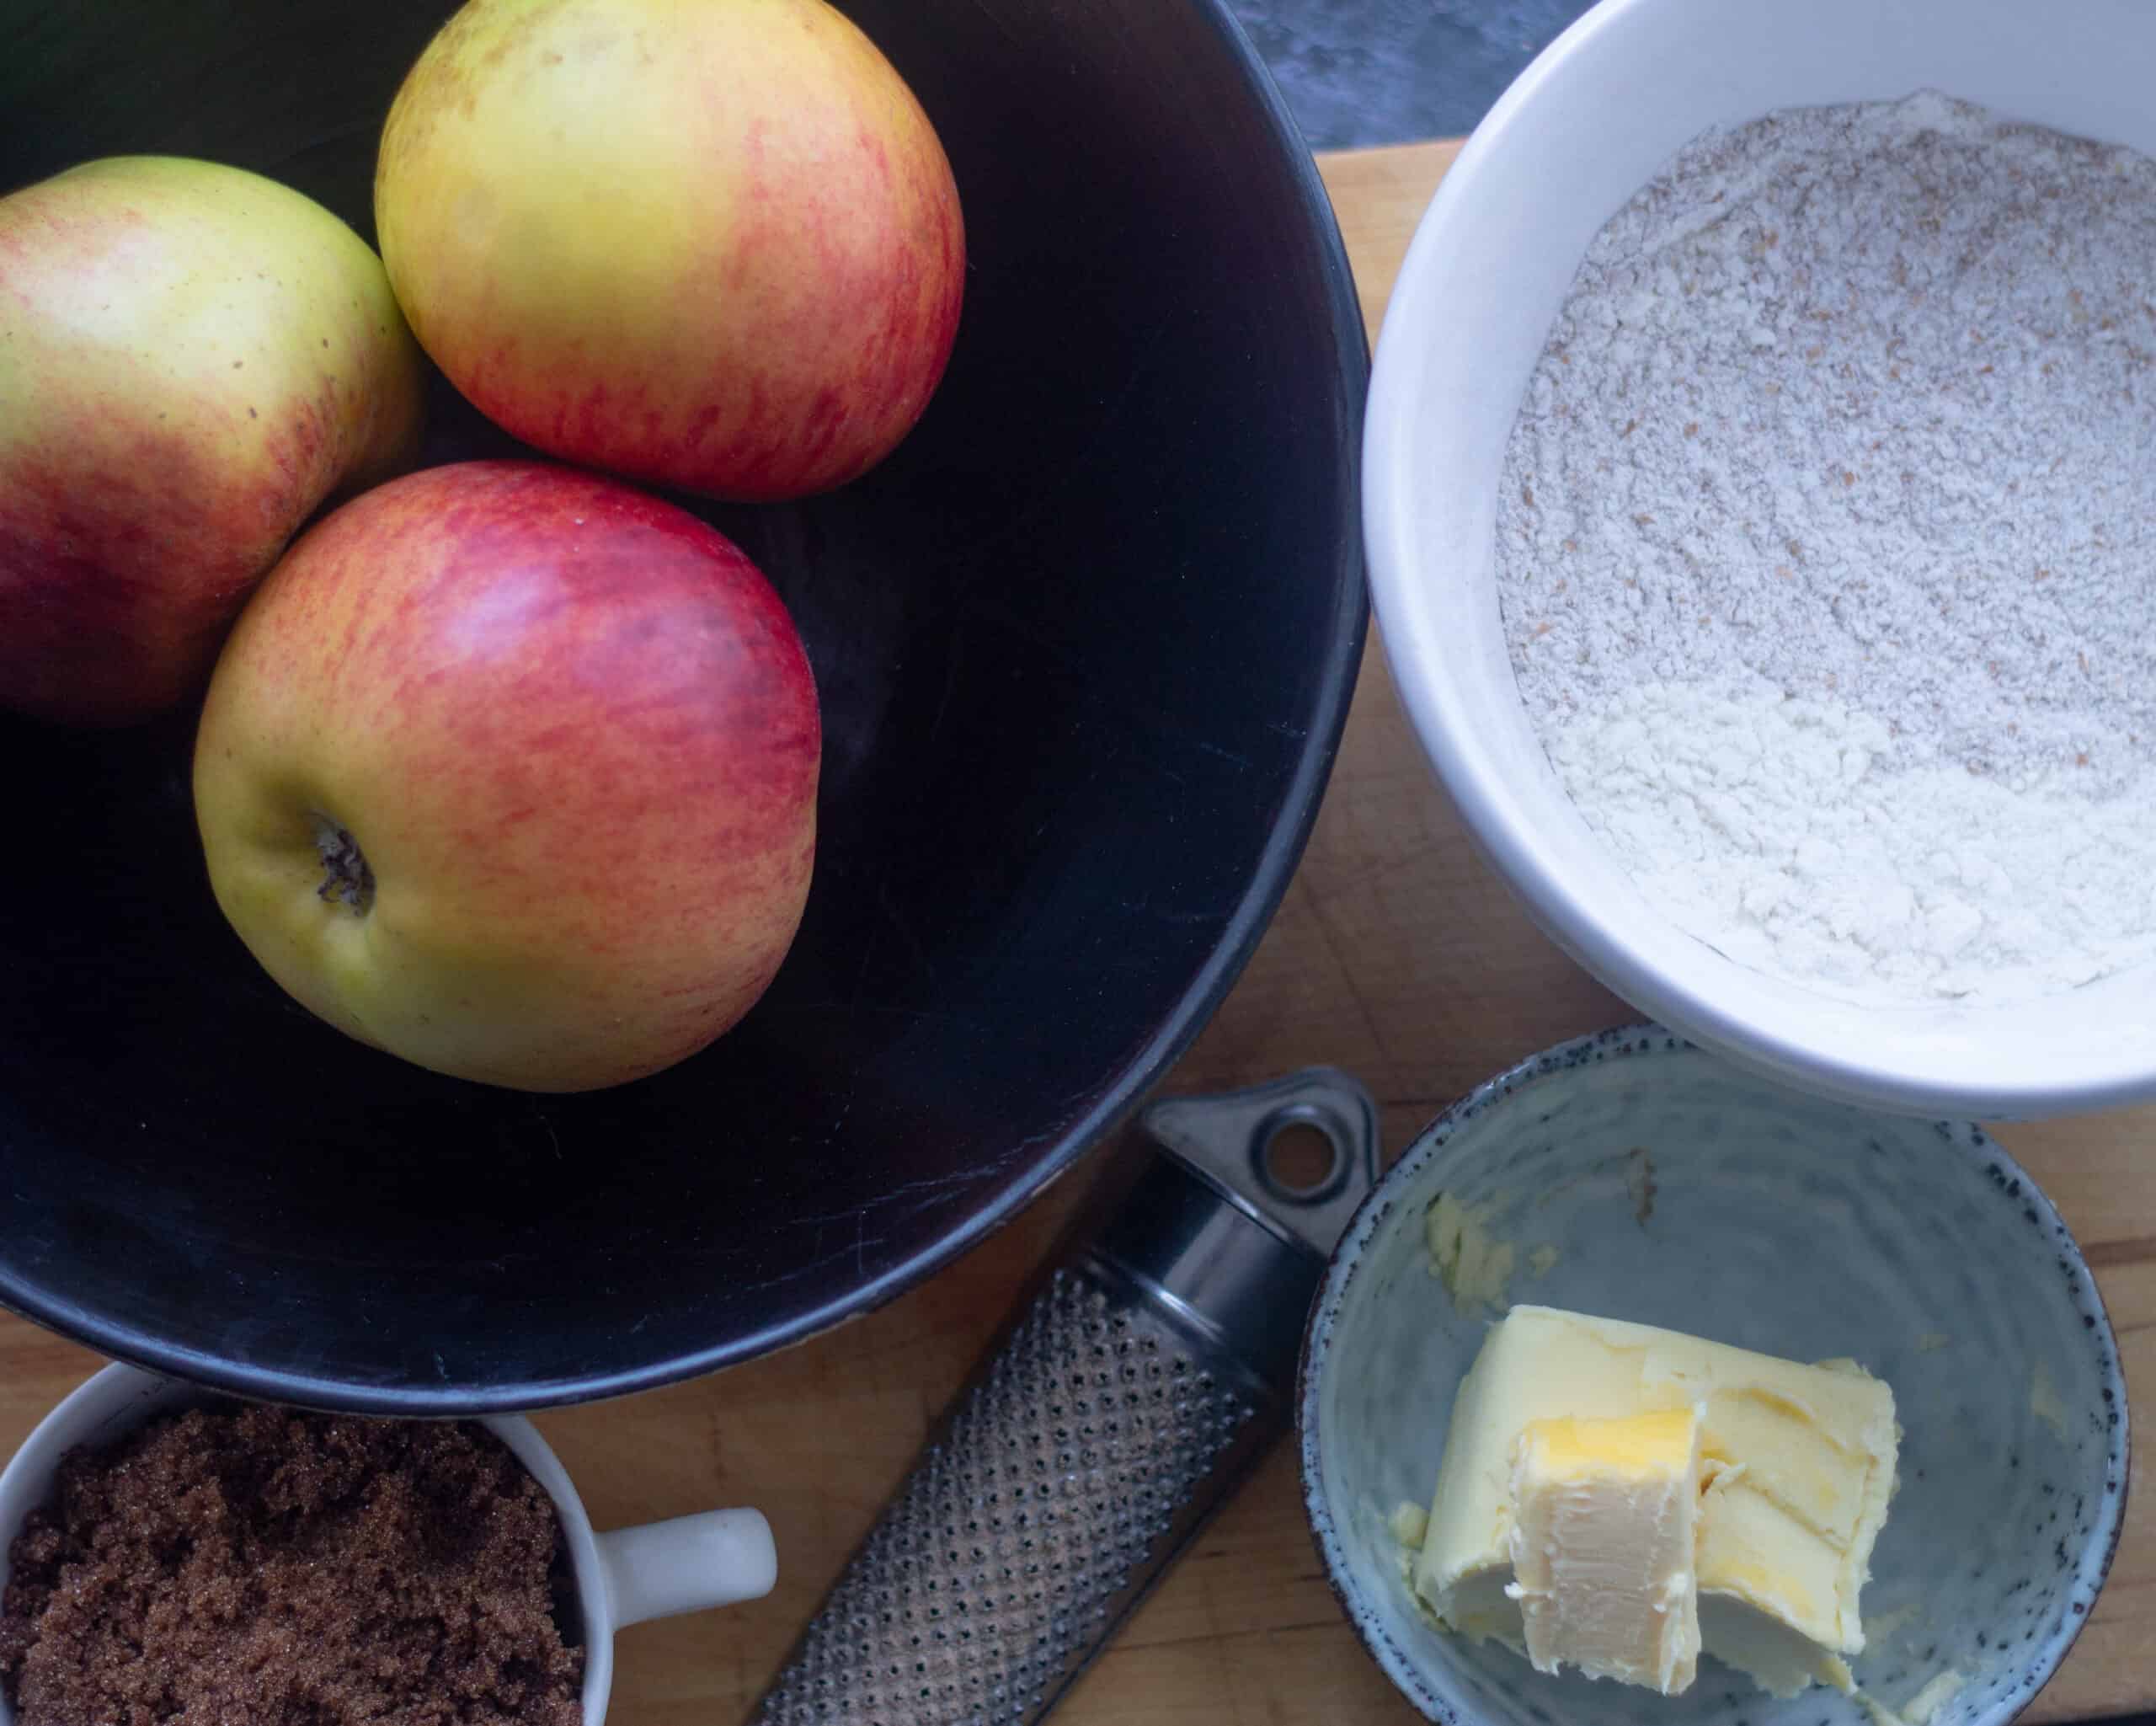 Ingredients for making apple crumble